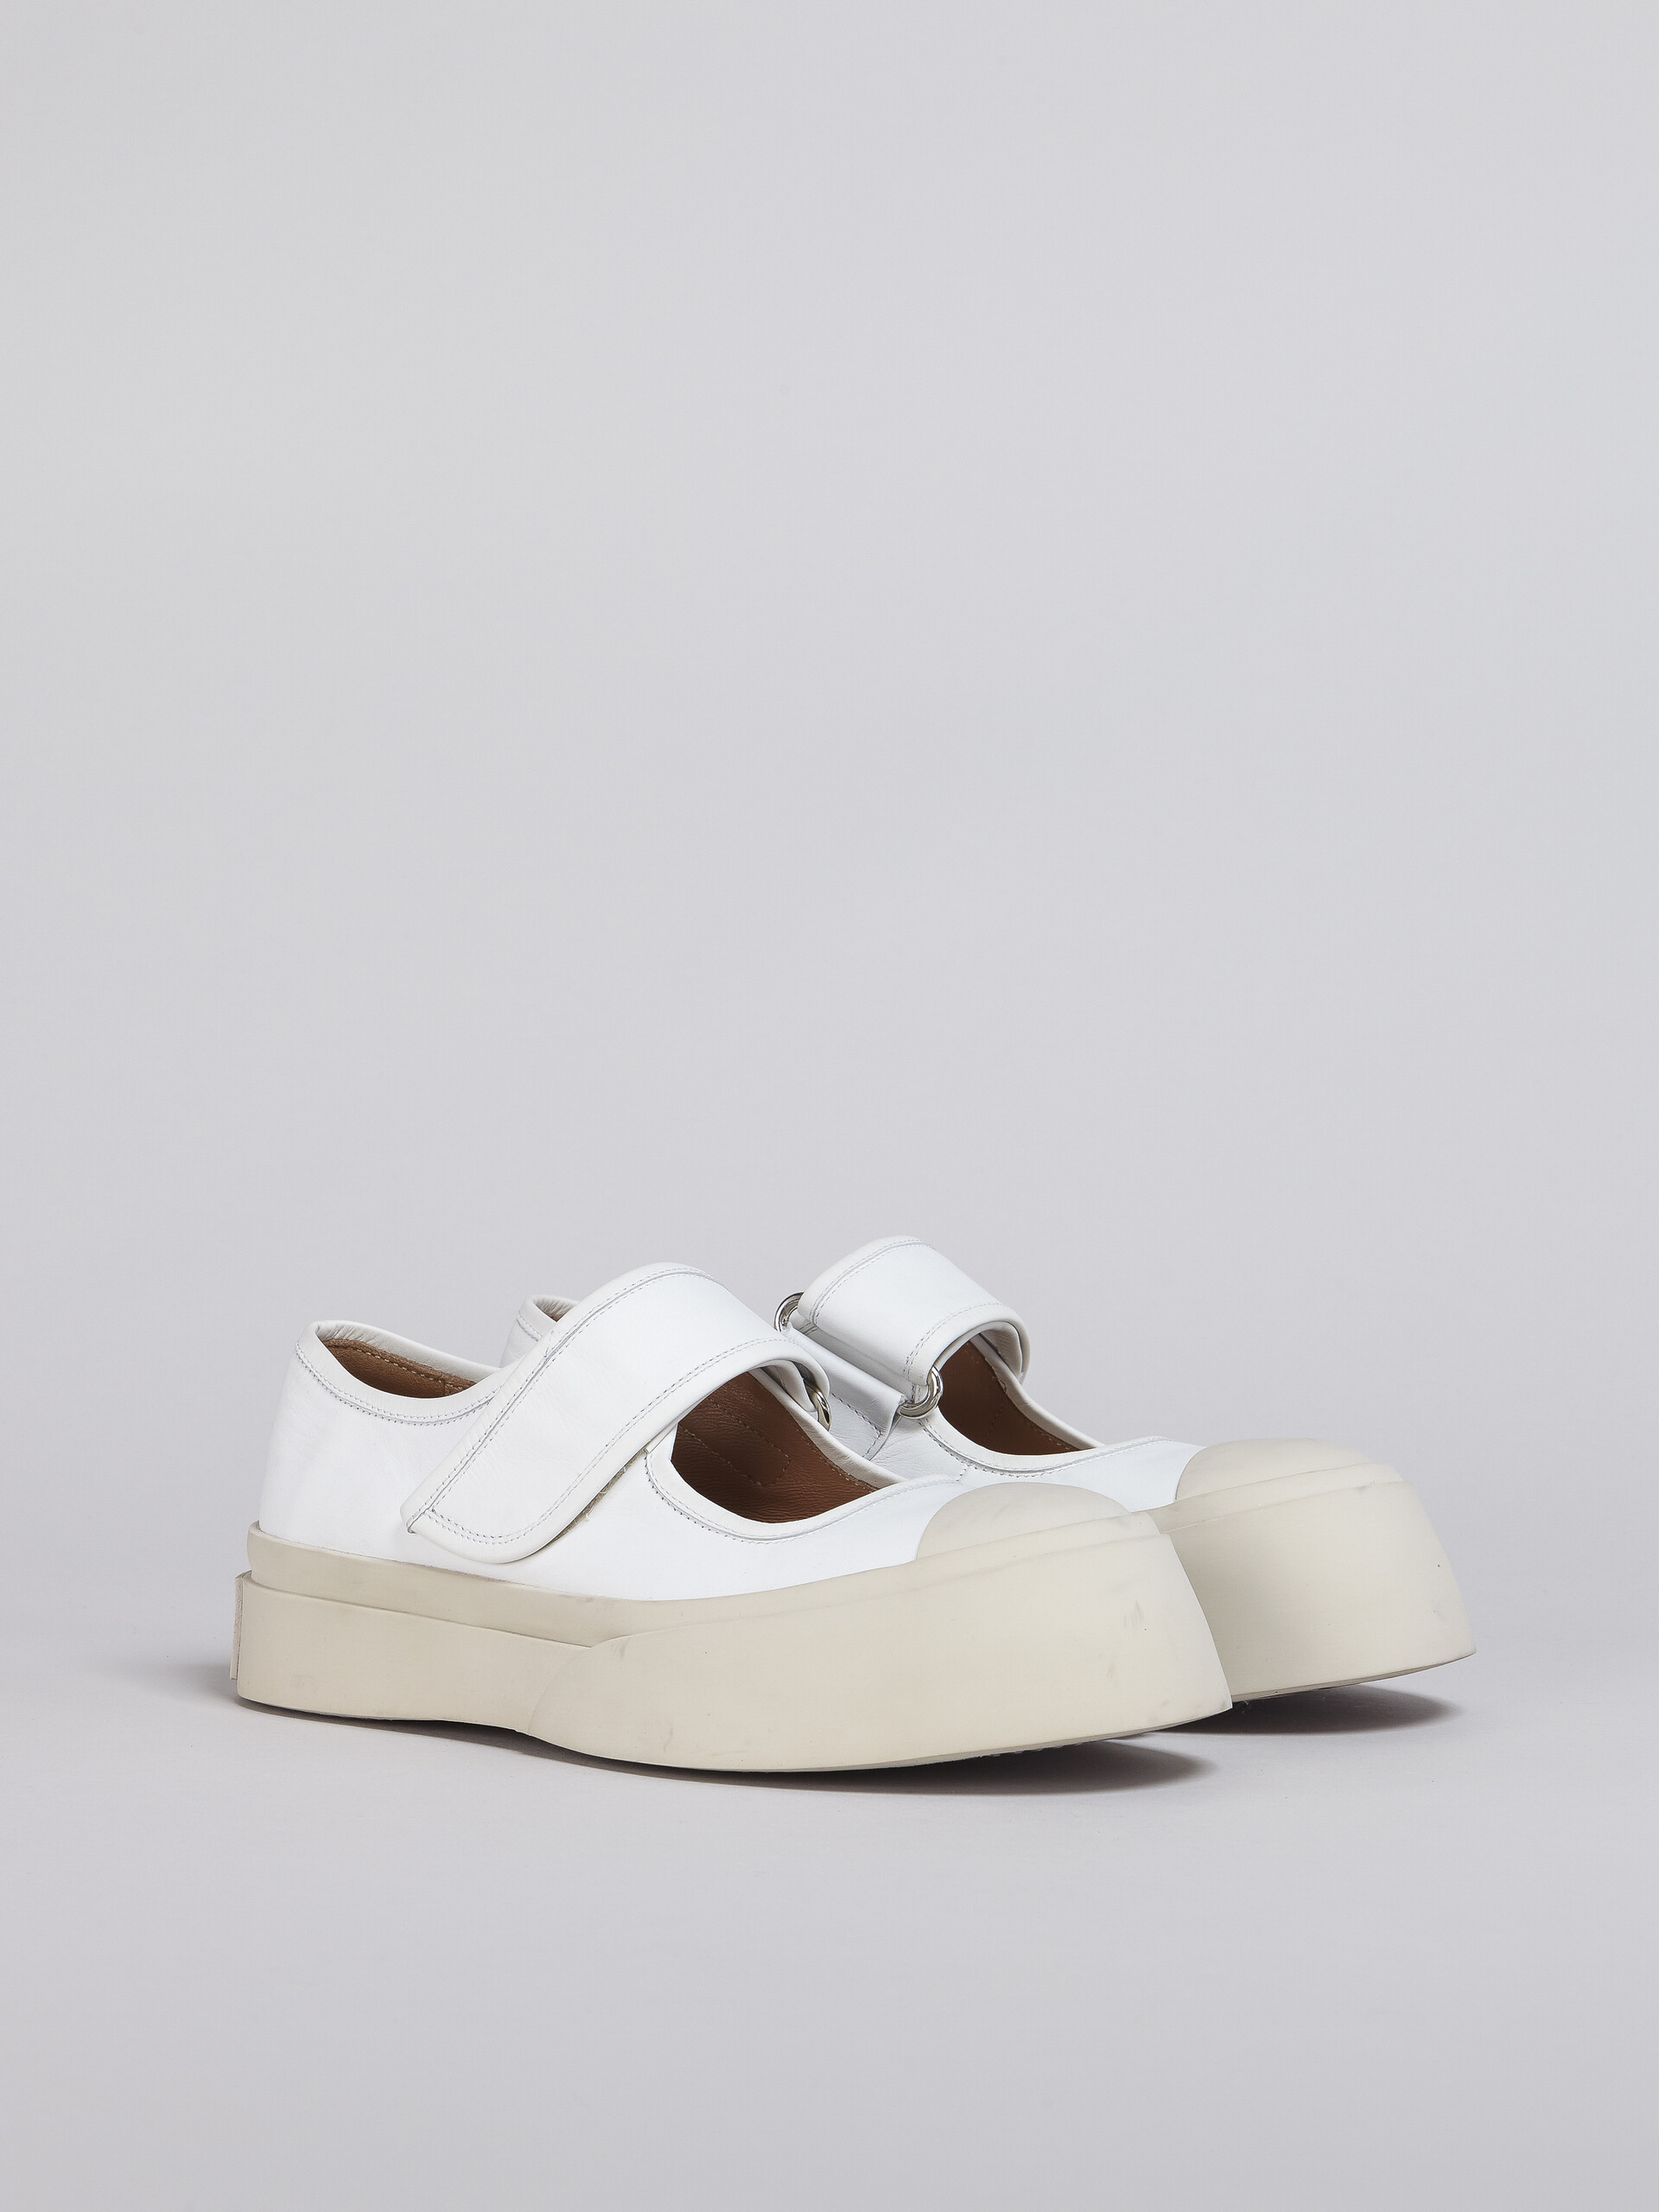 White nappa leather Mary Jane sneaker - Sneakers - Image 2